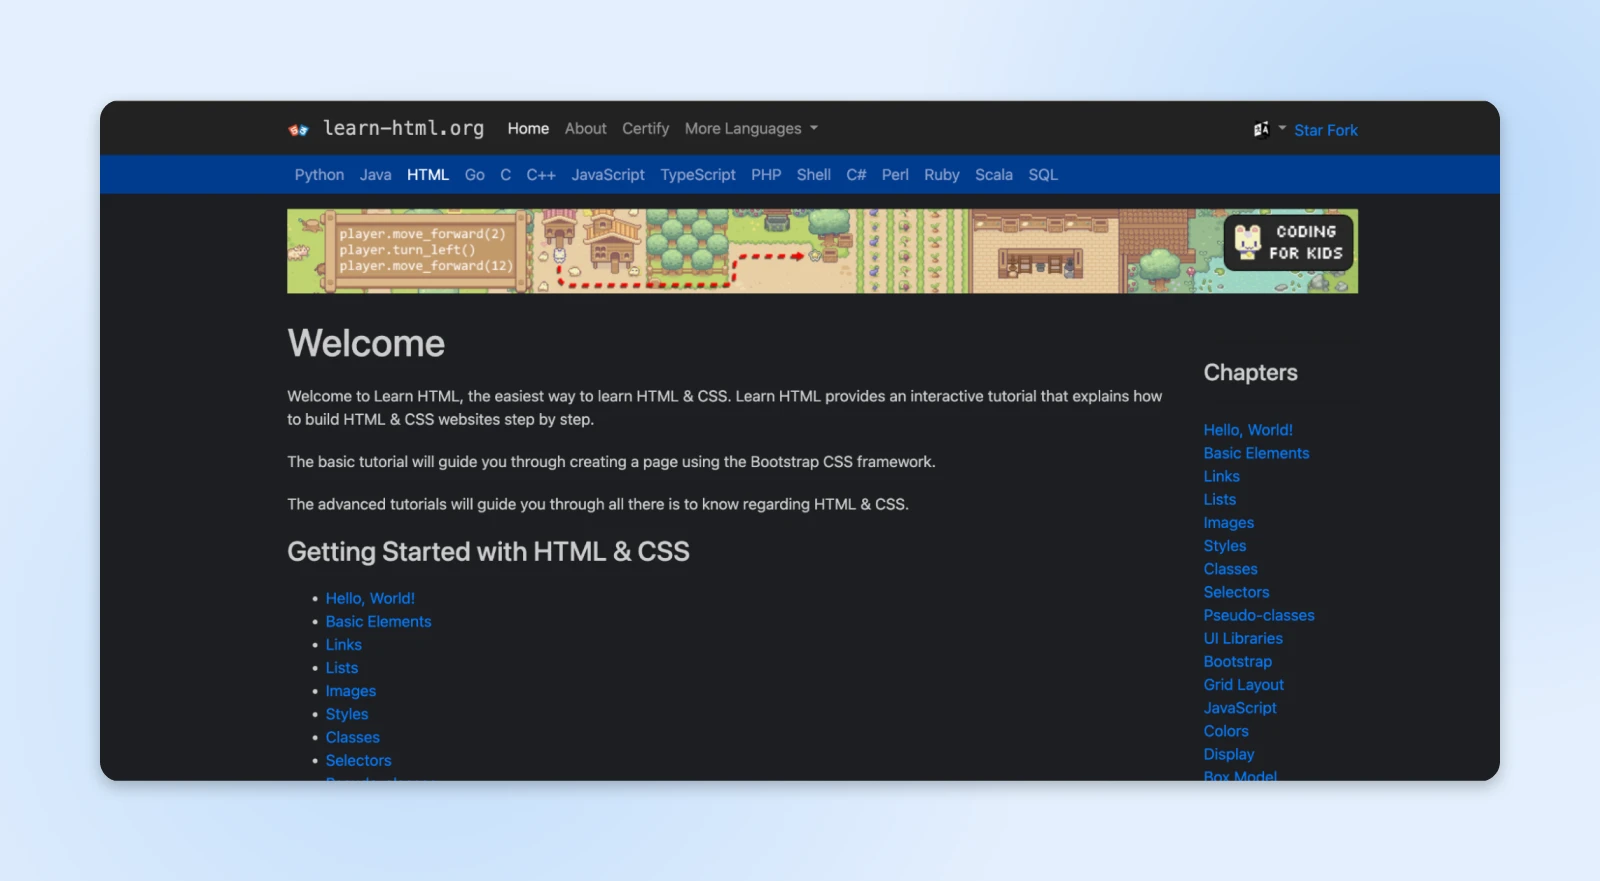 The Welcome page of Learn-HTML.org has white font and blue clickable links against a black background